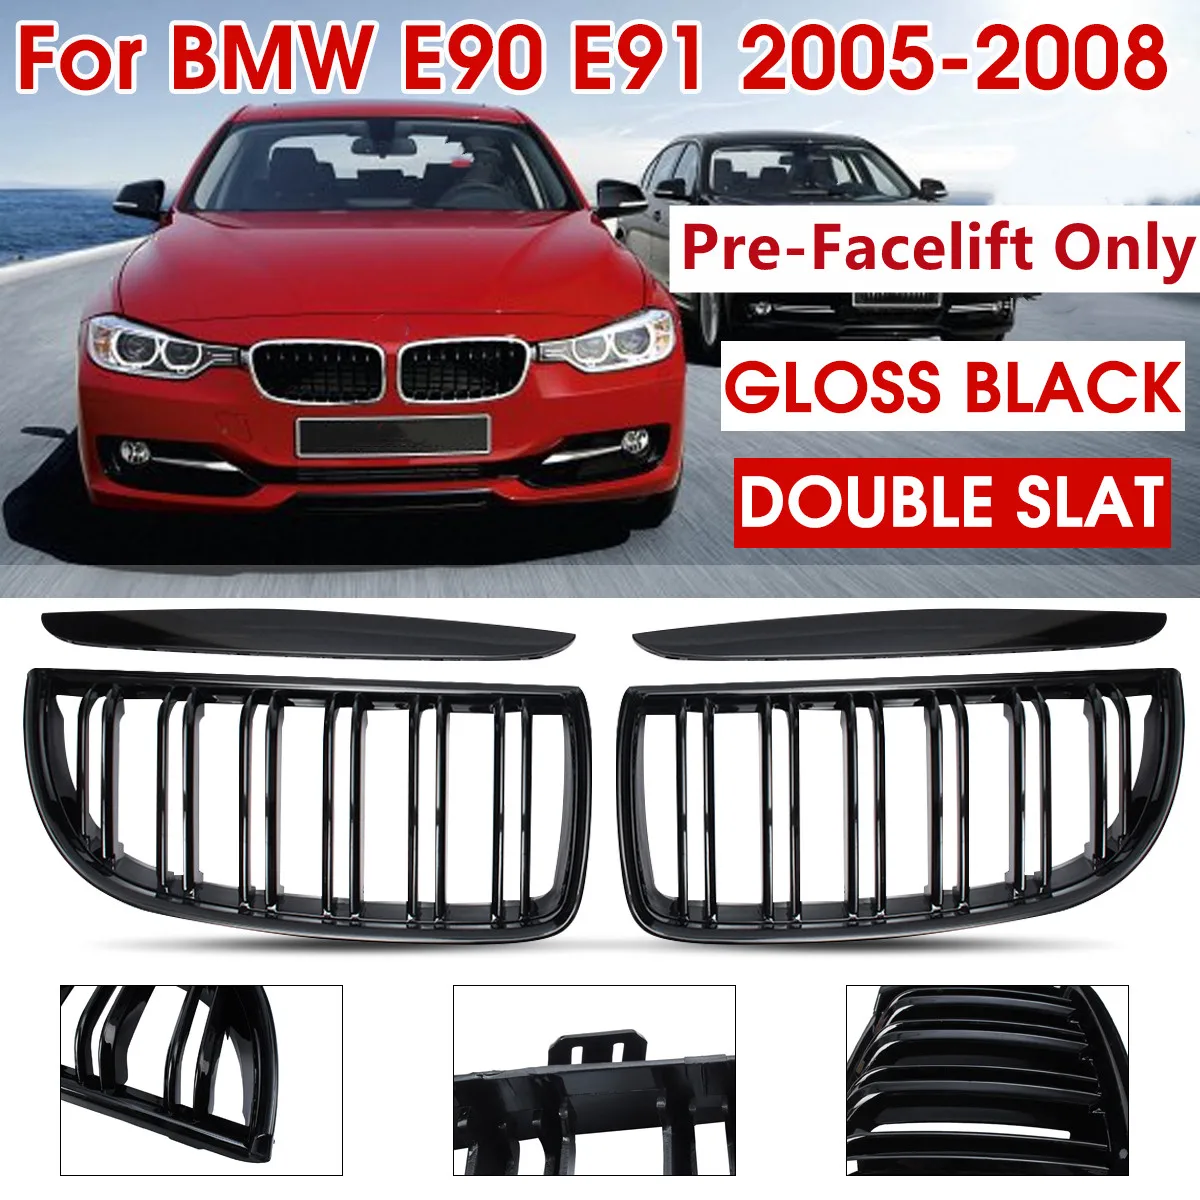 

Car Grille Grill Front Kidney Gloss Black Double Slat For BMW E90 E91 Pre-Facelift 2005 2006 2007 2008 Racing Grill Hood Eyelids